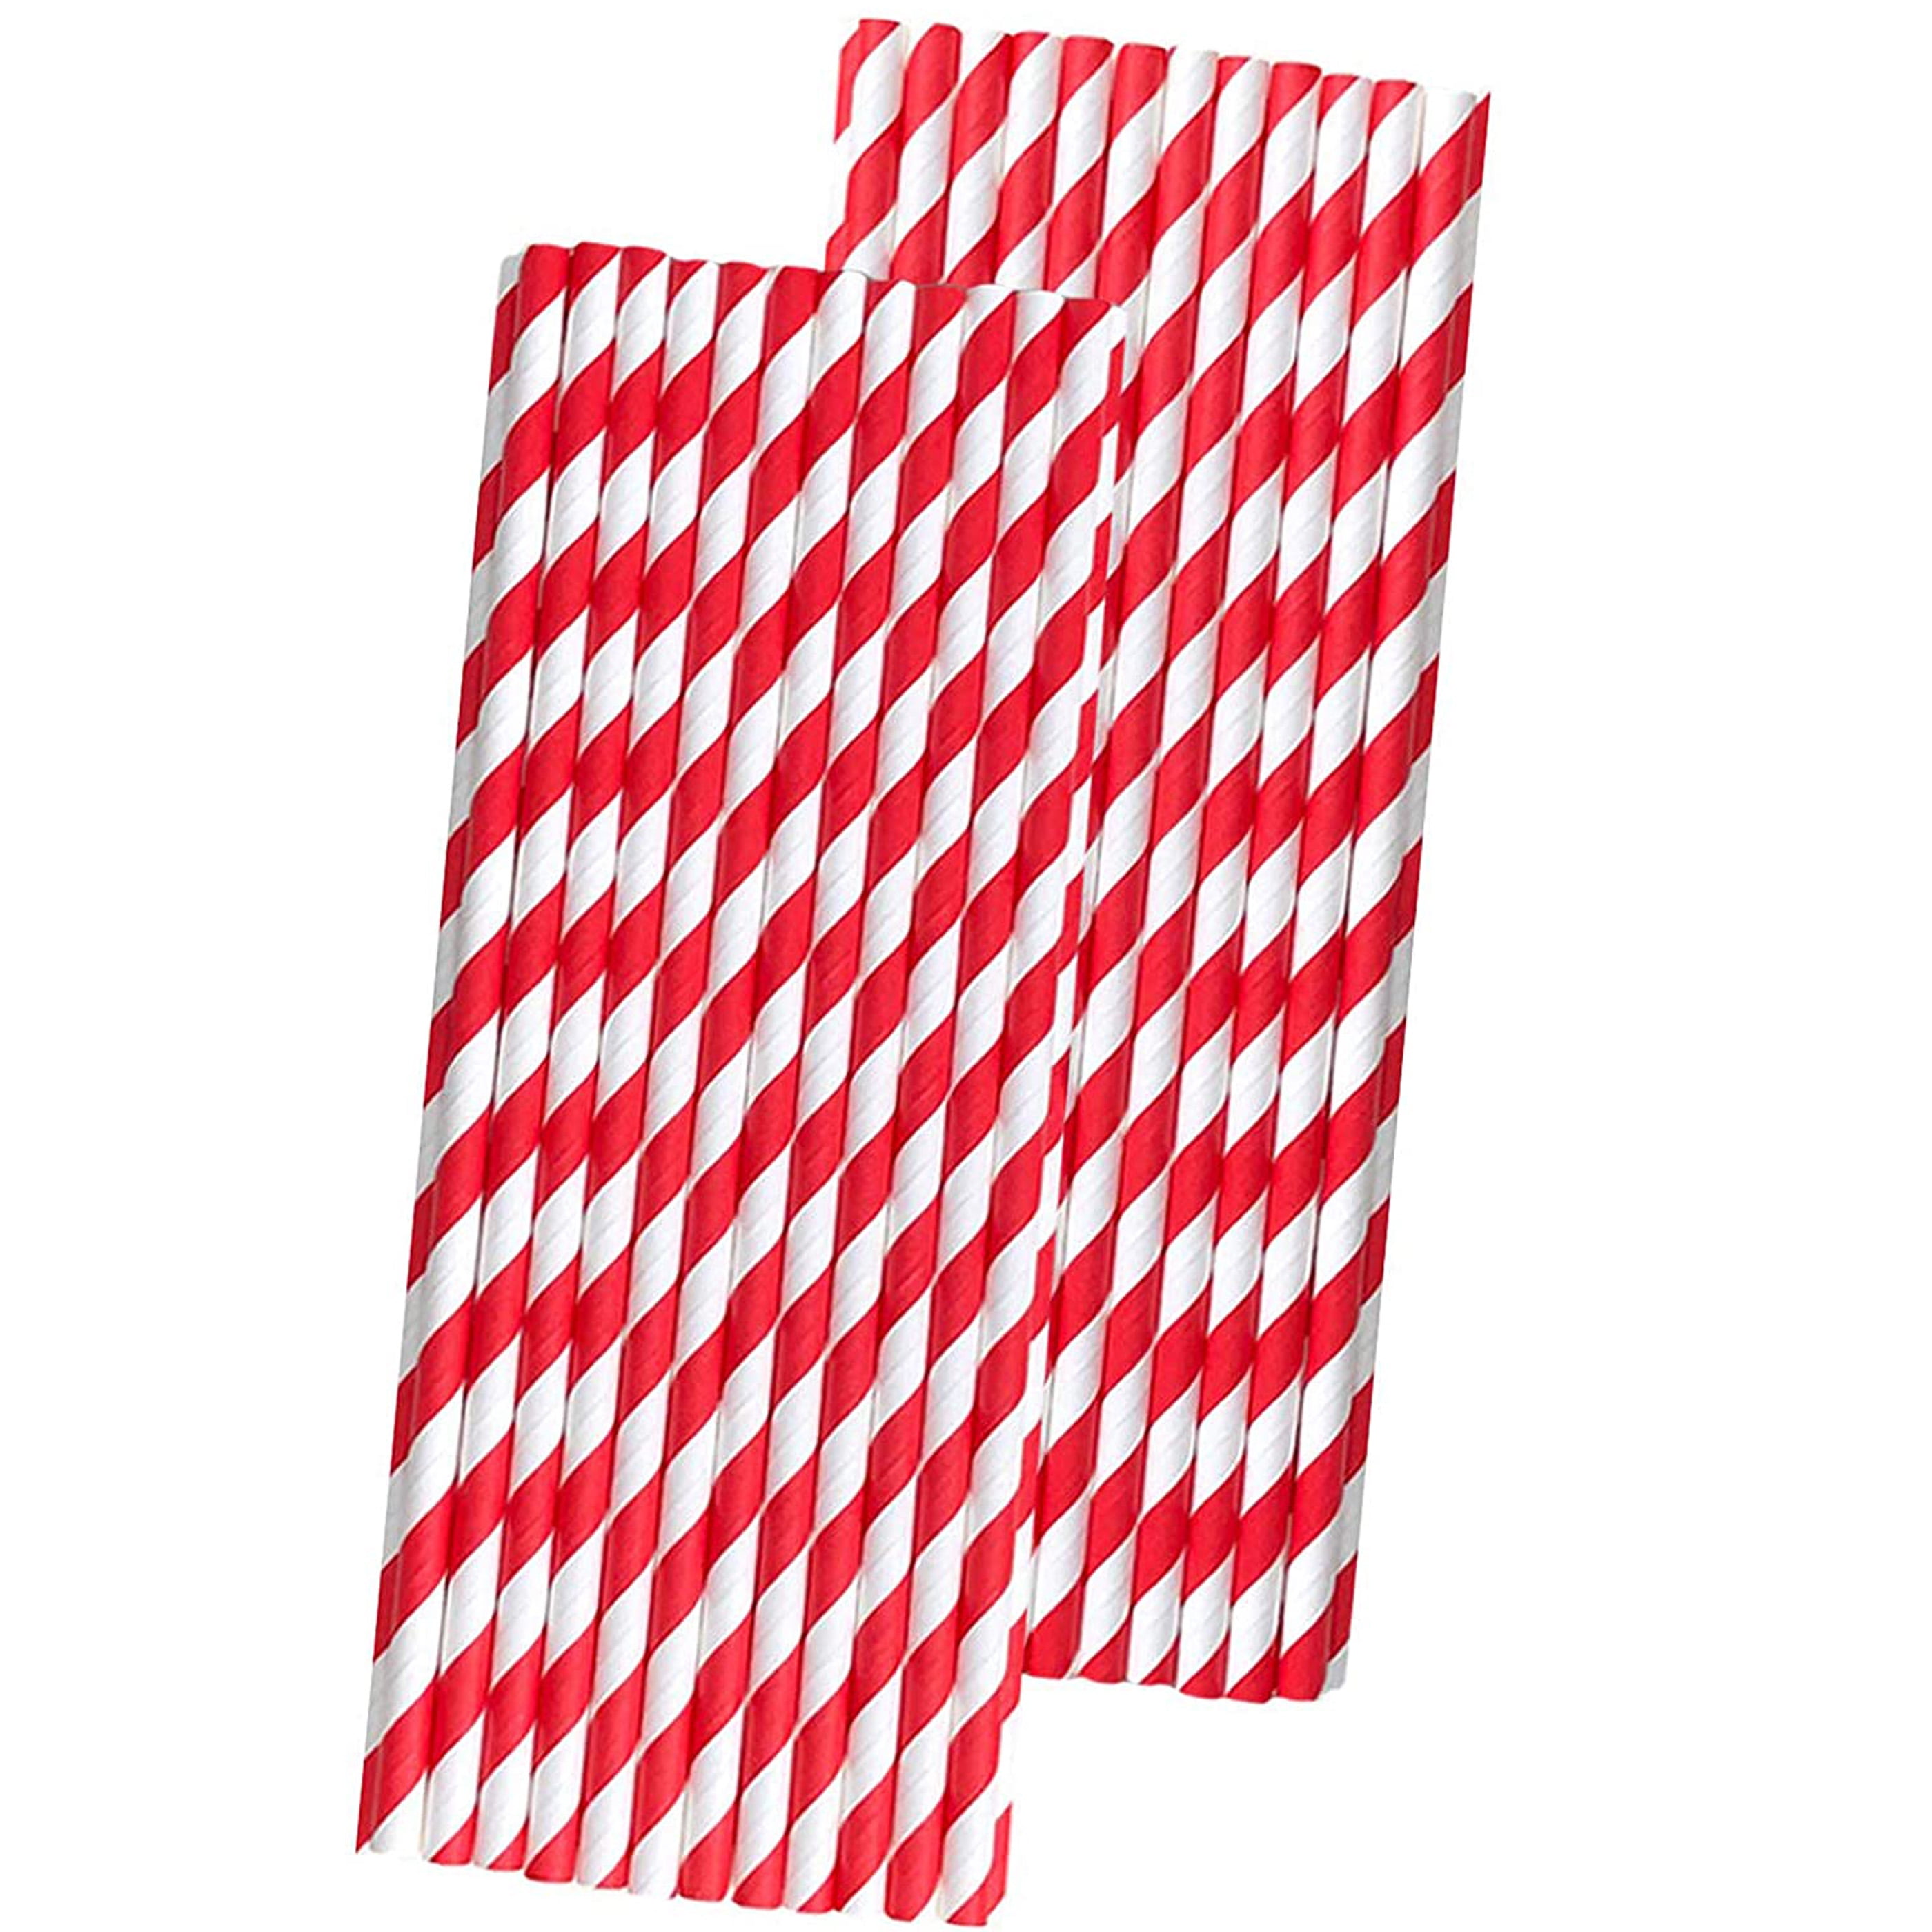 Colorful thin red paper straws 50pcs - Tapegarden